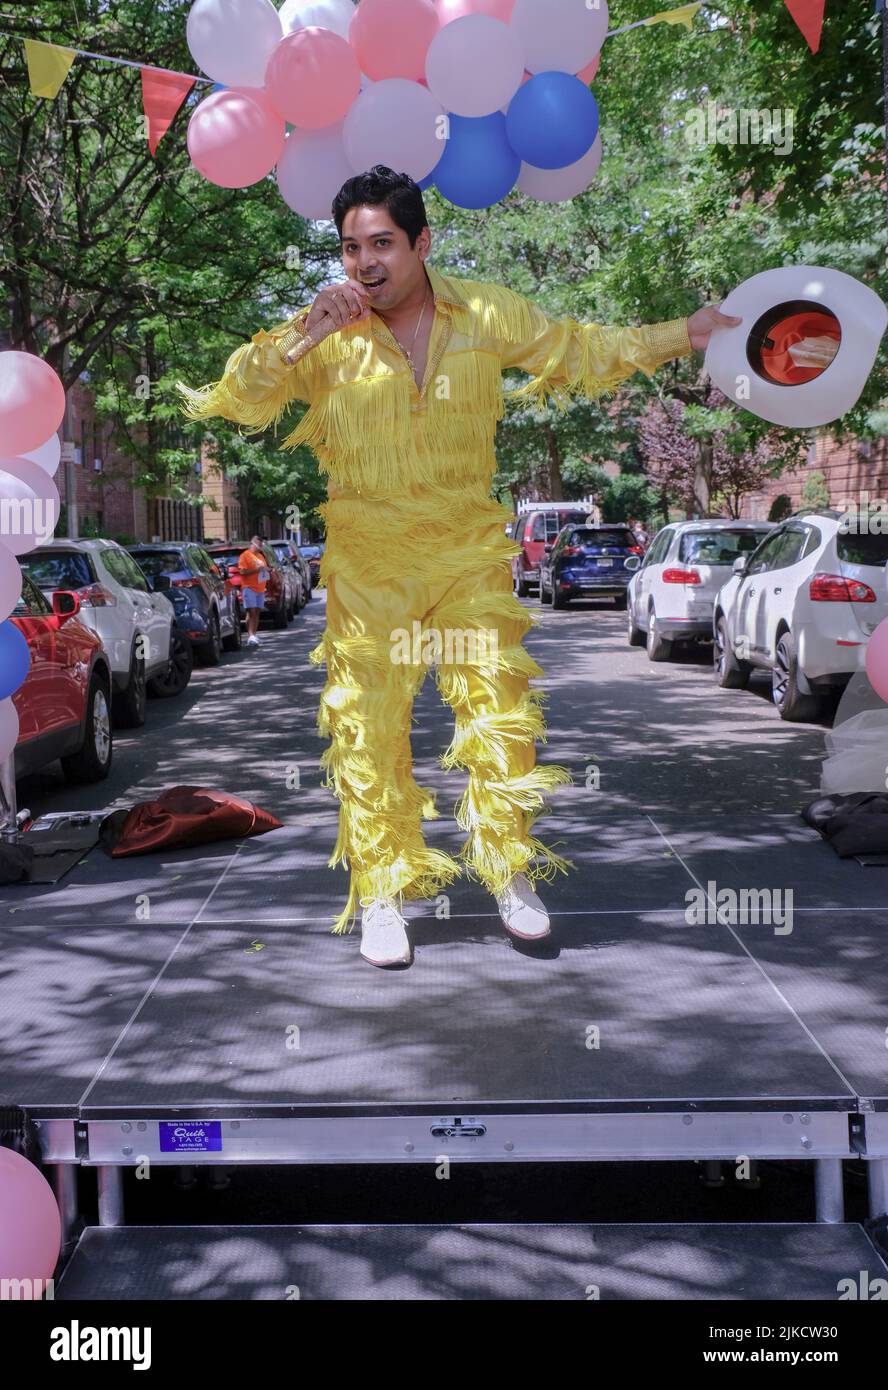 Singer Randy Valverde performs onstage at Trans Fest on 83rd Street in Jackson Heights, Queens, New York City. Stock Photo